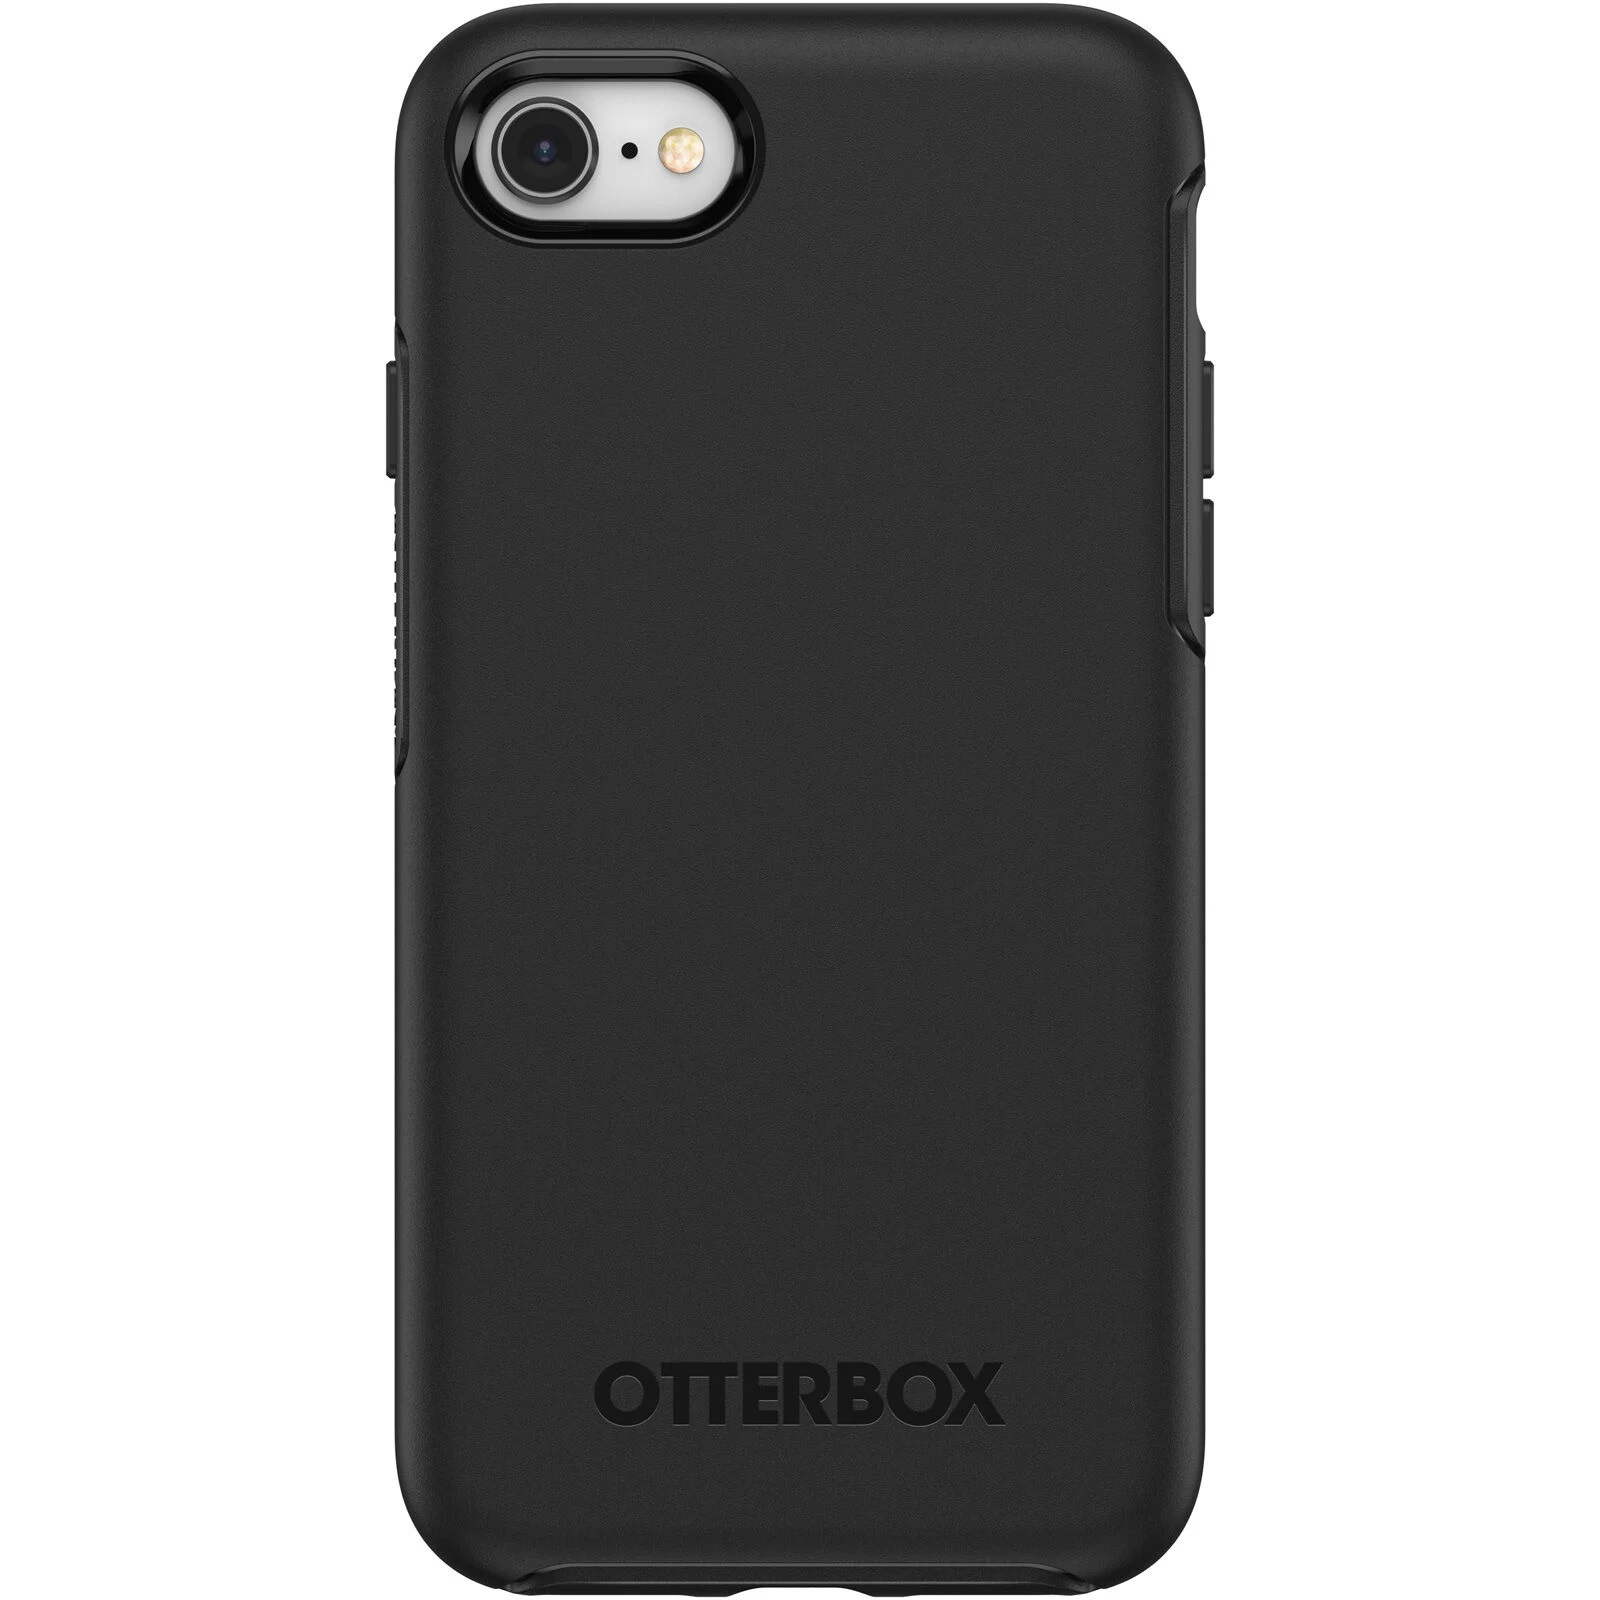 OtterBox Symmetry Apple iPhone SE (3rd  2nd Gen) and iPhone 8/7 Case Black – (77-56669), Antimicrobial, DROP+ 3X Military Standard, Raised Edges